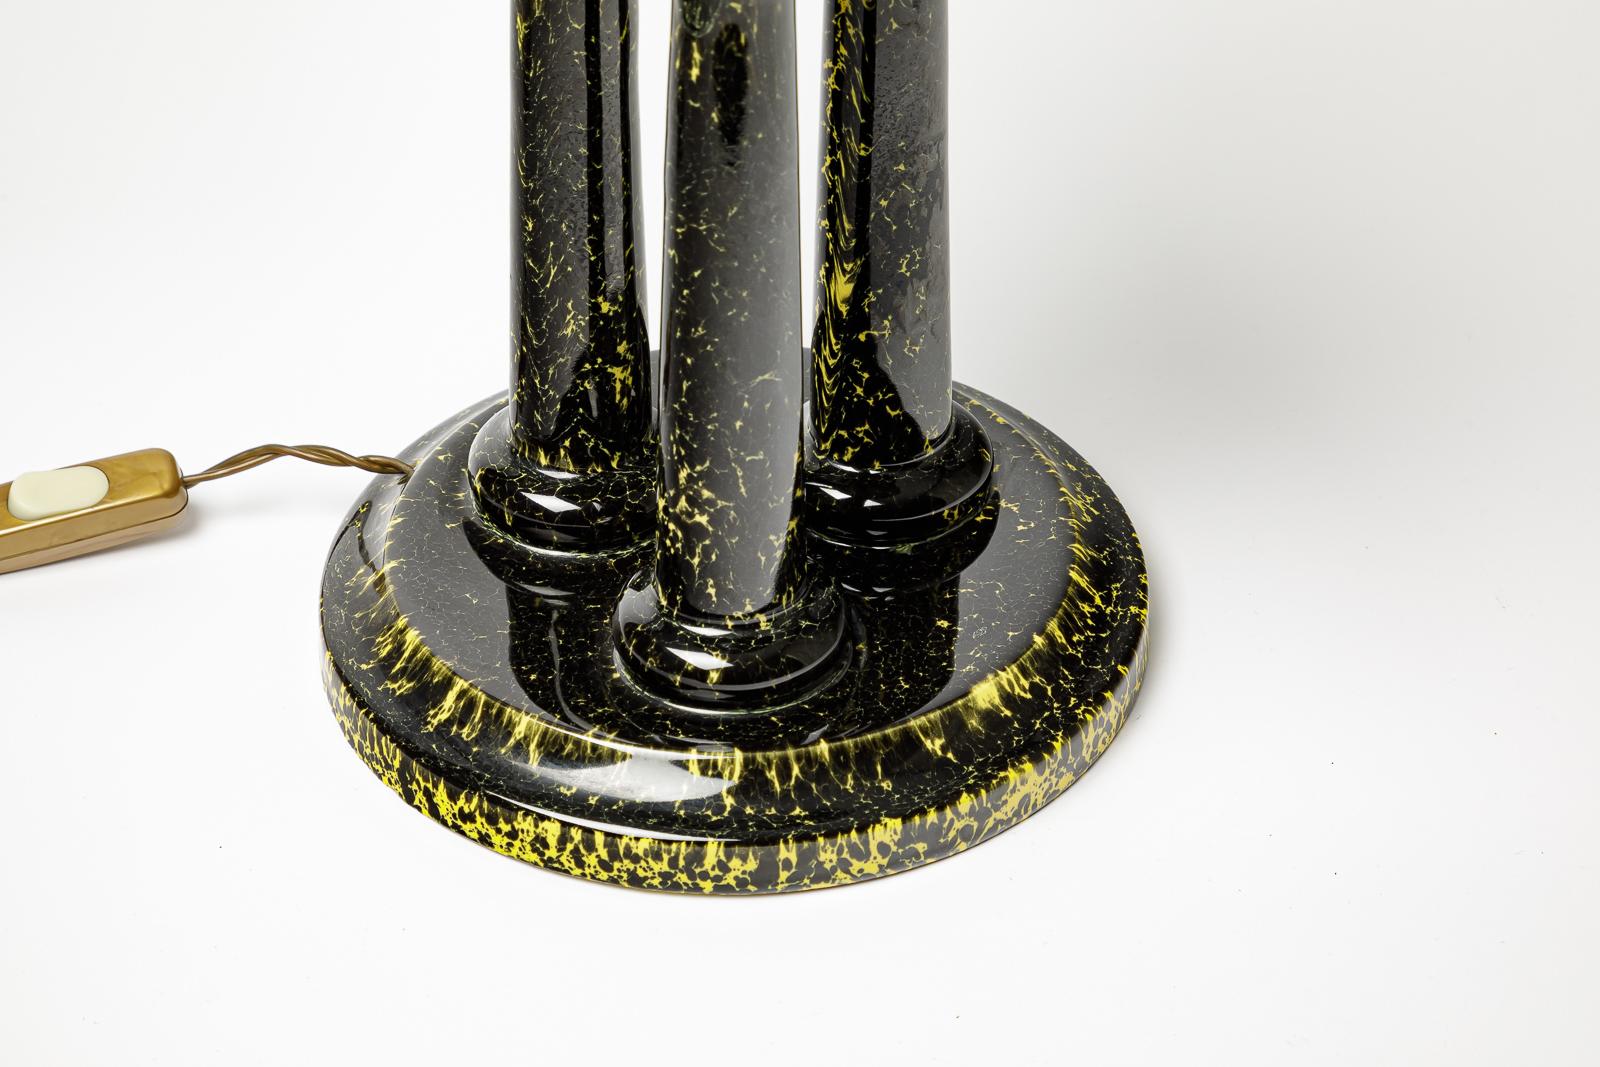 French Balck and Yellow 20th Century Columns Ceramic Table Lamp by Dc St Pair 1960 For Sale